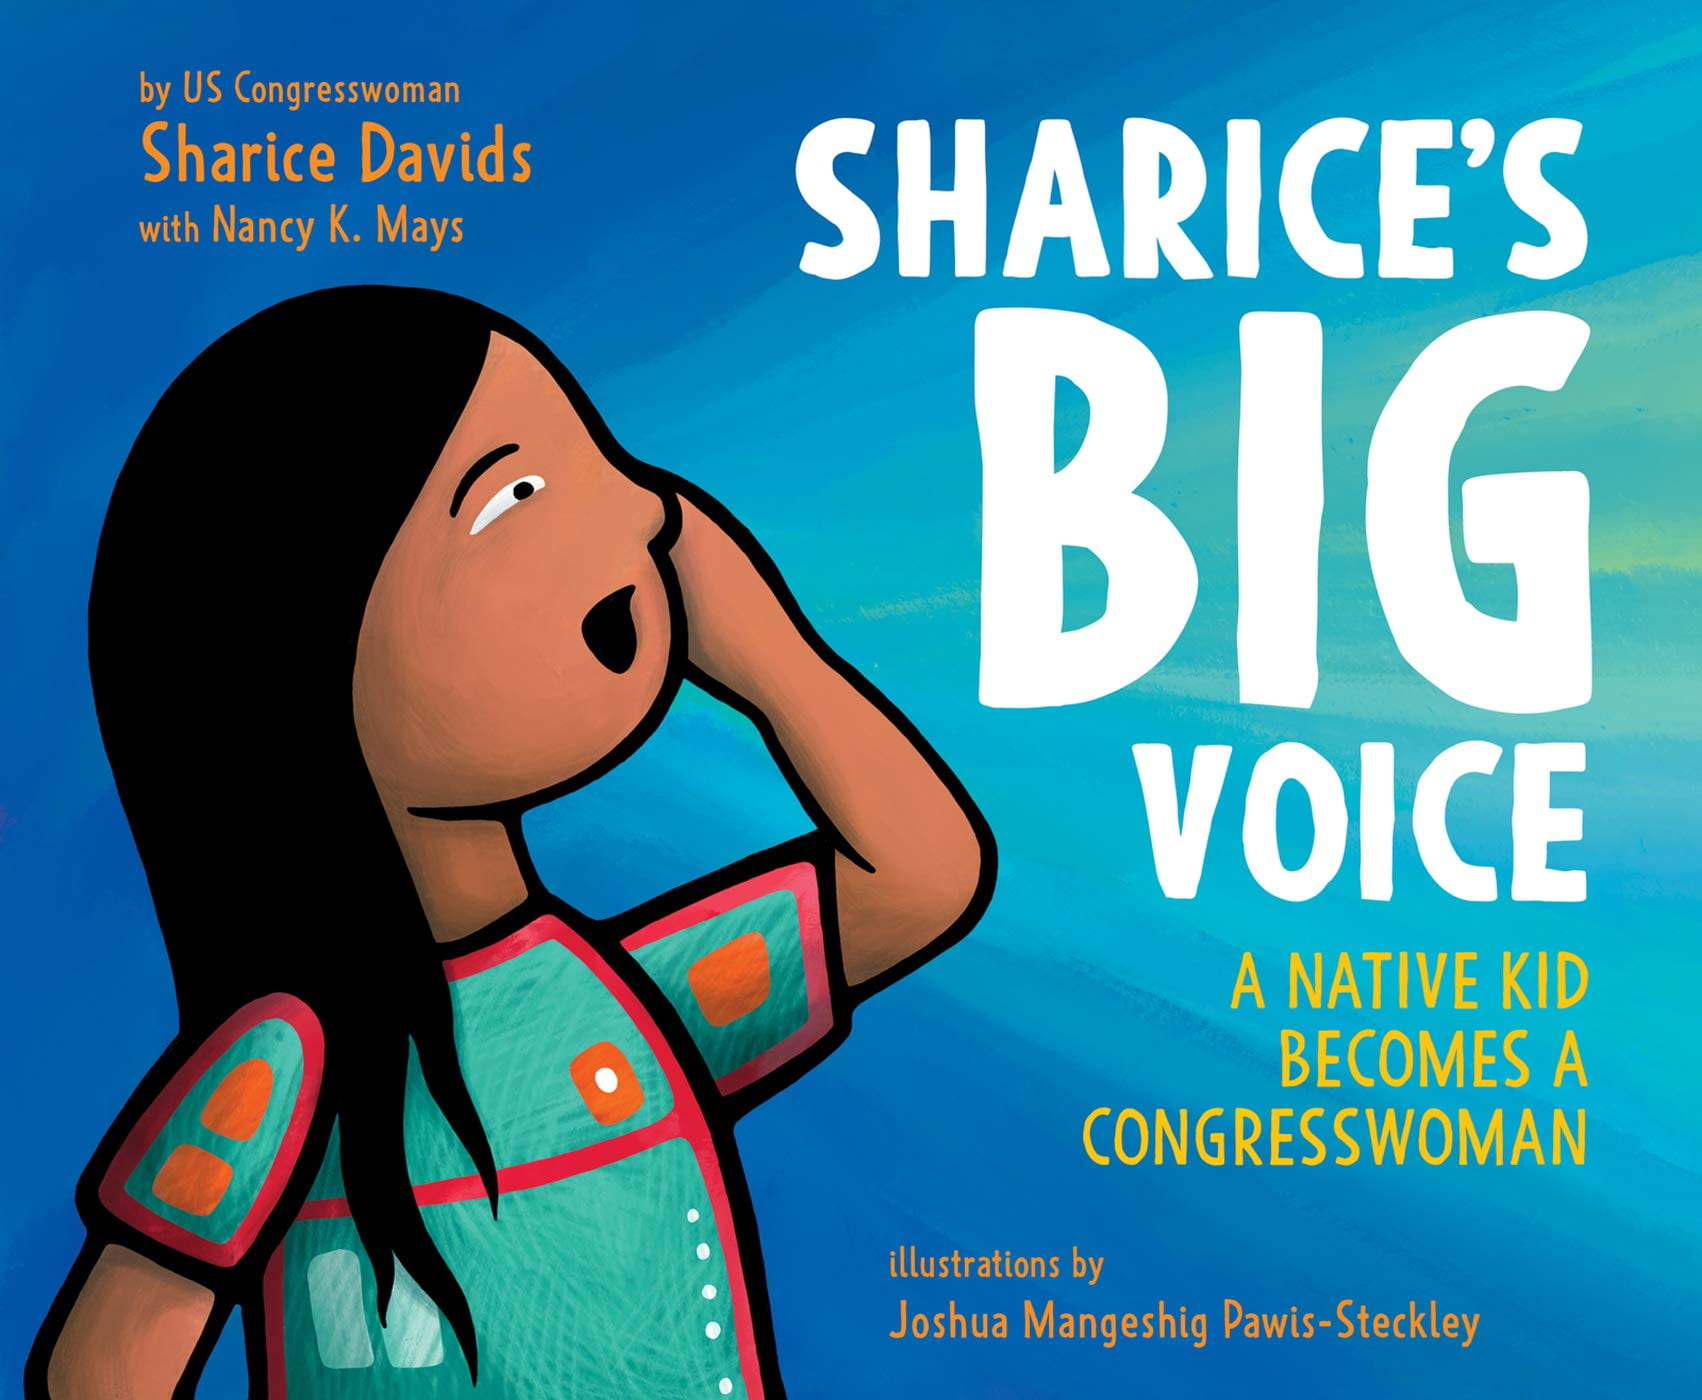 Illustration of a young woman yelling and text that says Sharice's big voice.